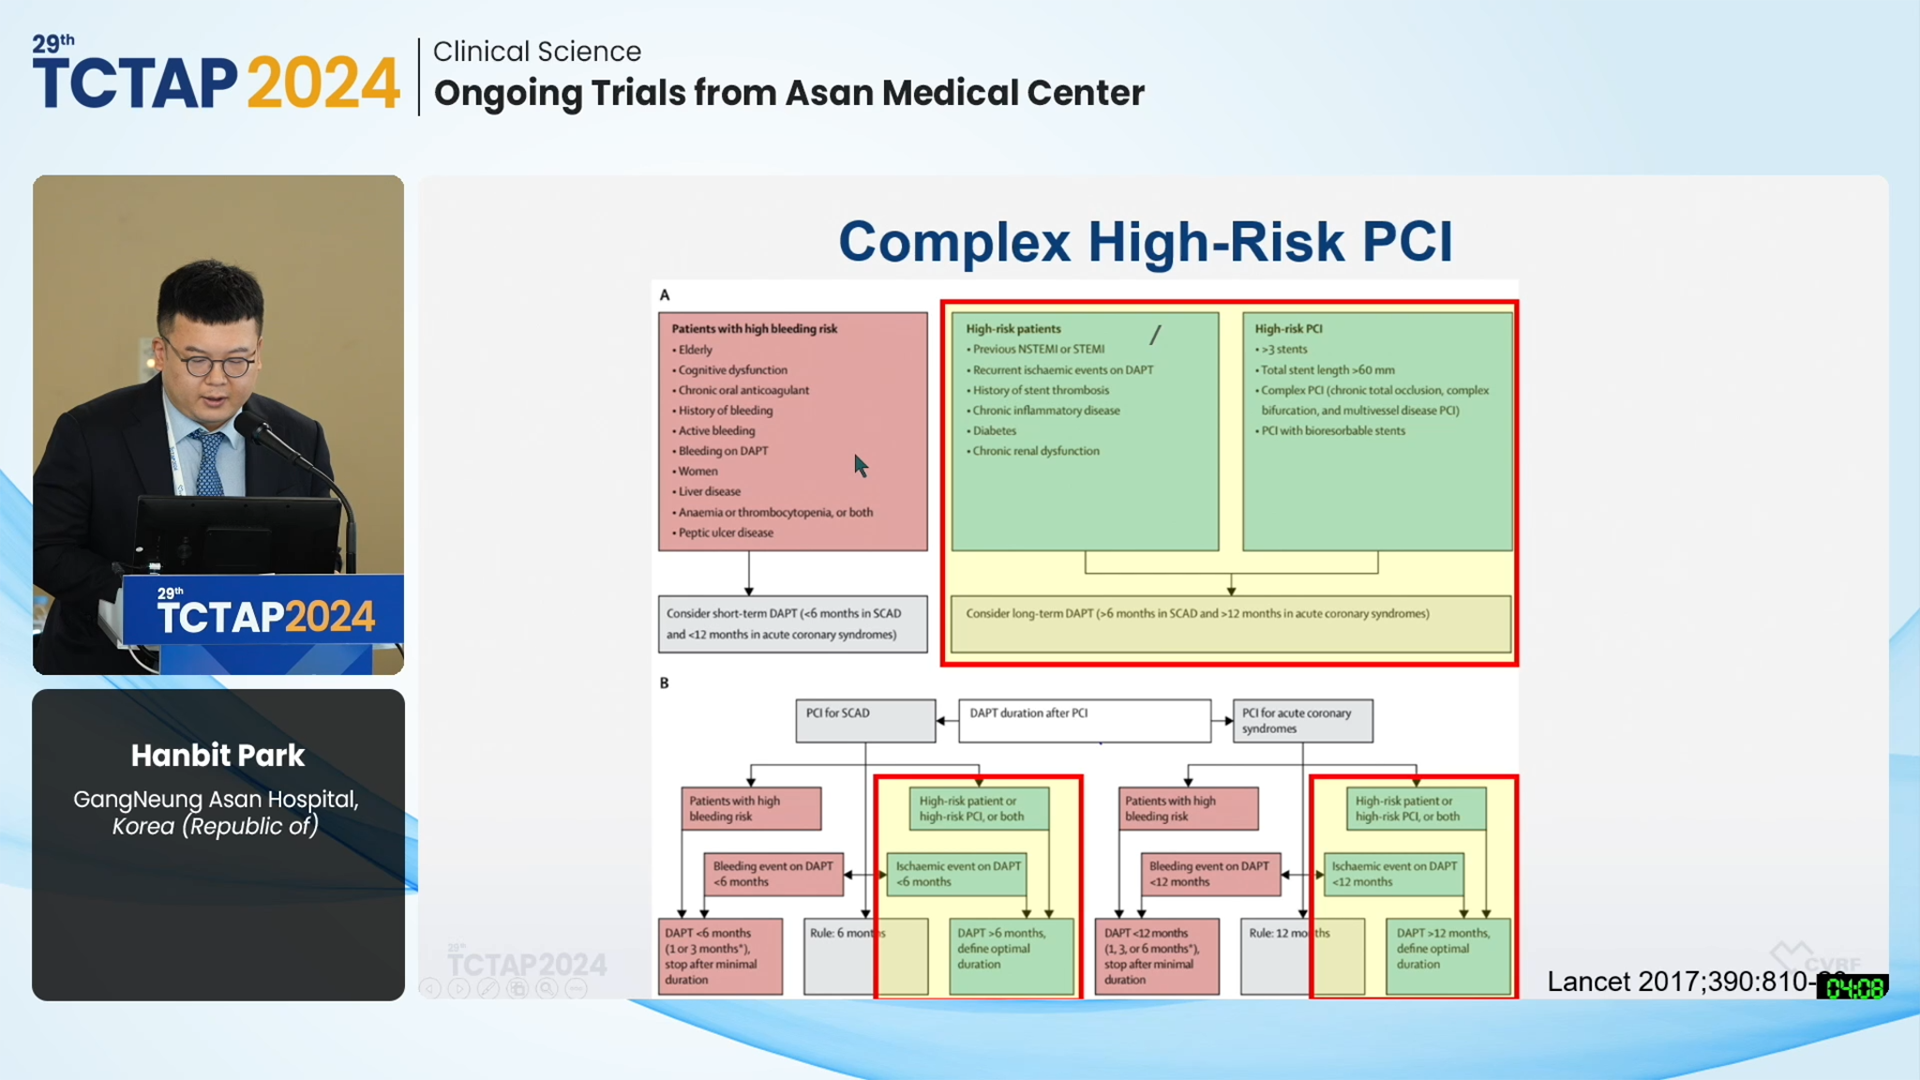 [Clinical Science] Ongoing Trials from Asan Medical Center